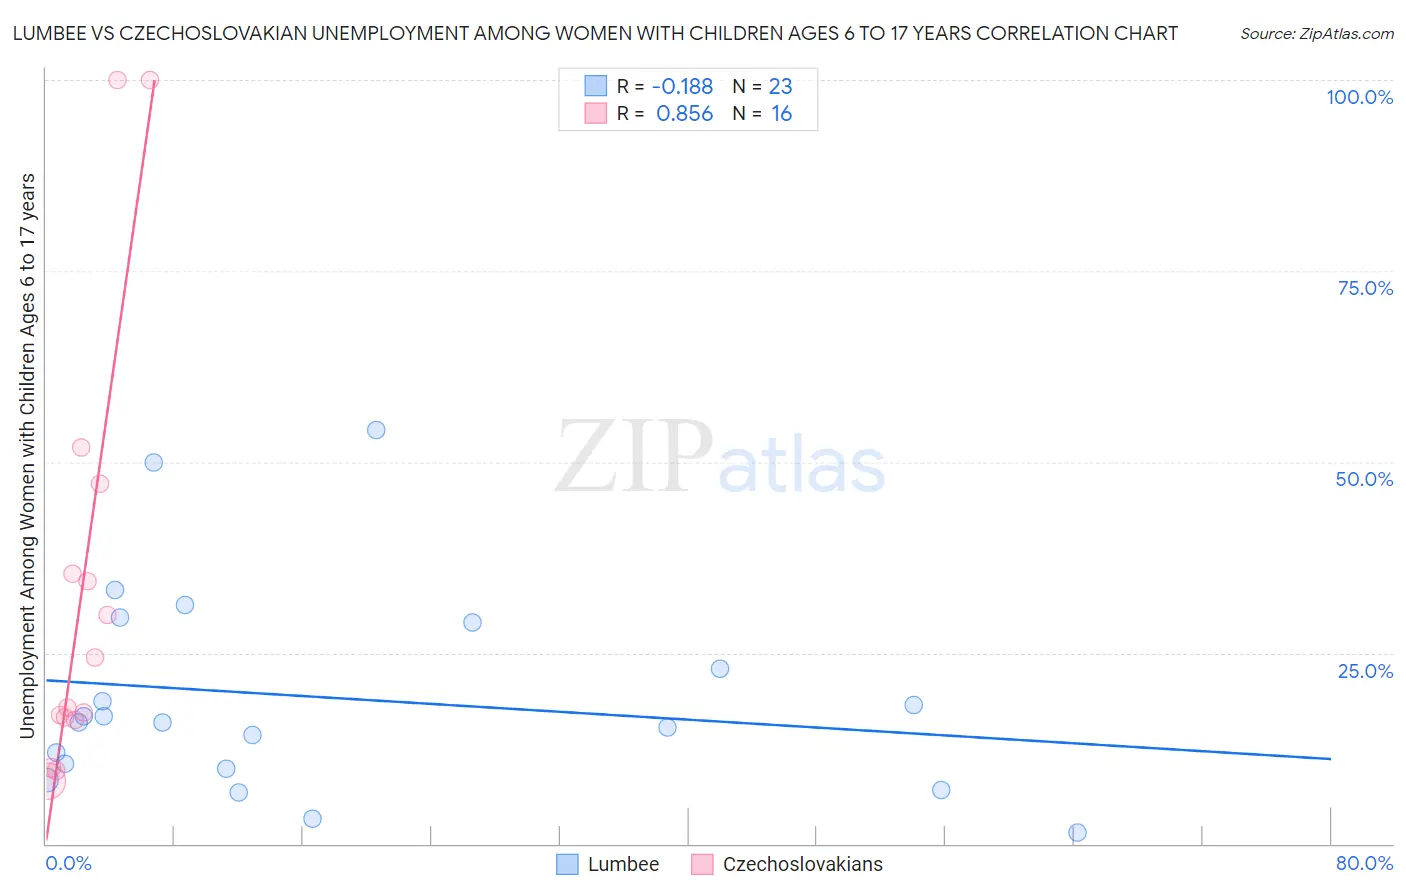 Lumbee vs Czechoslovakian Unemployment Among Women with Children Ages 6 to 17 years